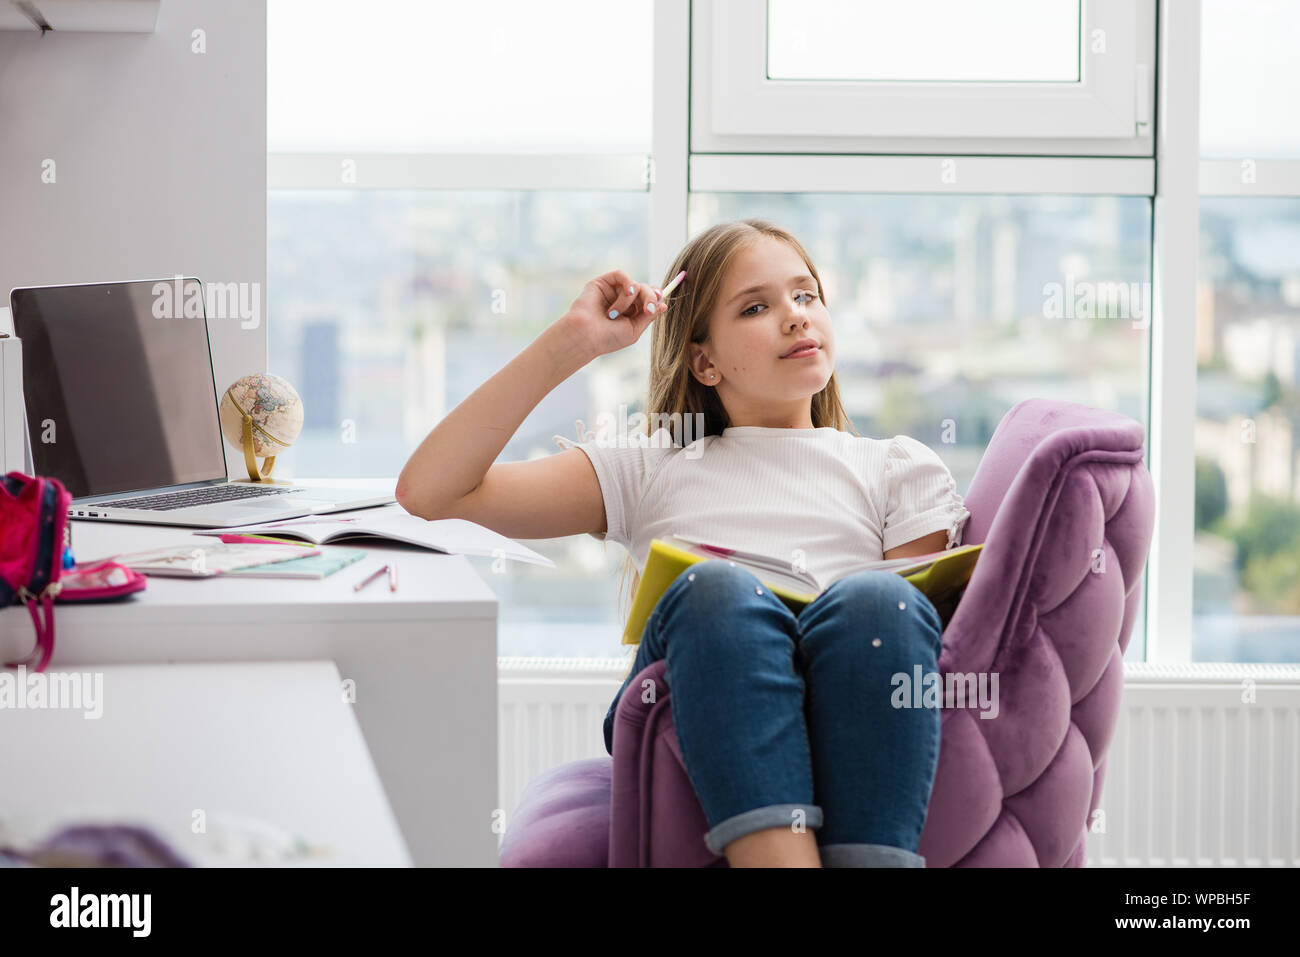 Dreaming pretty school girl with book and pencil. School supplies and laptop in background. Stock Photo